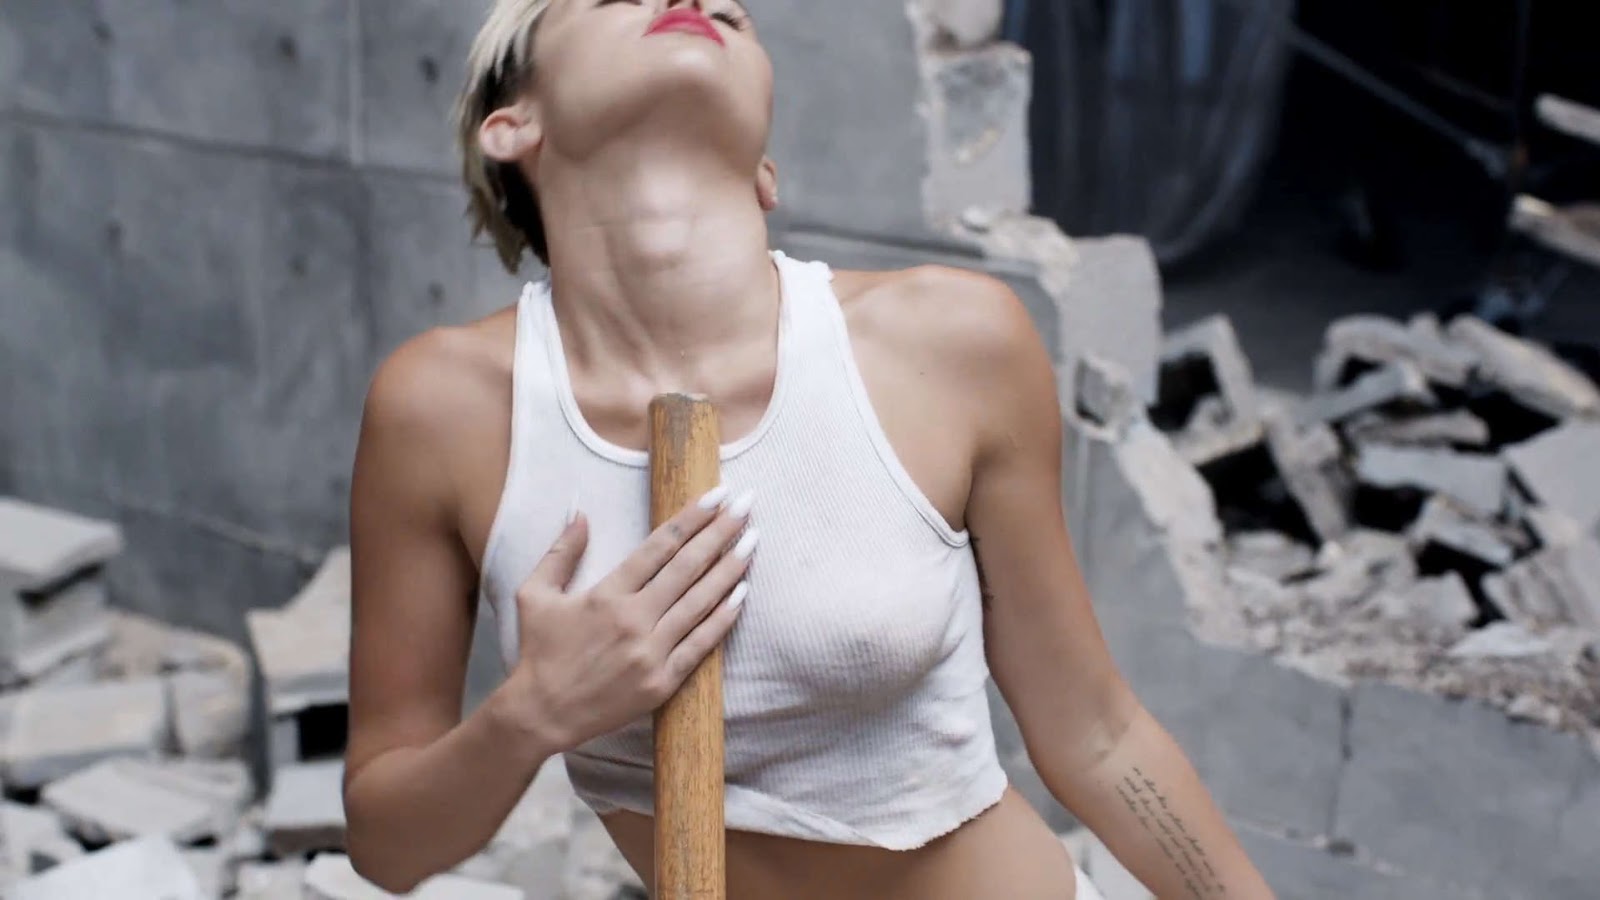 Miley cyrus wrecking ball uncensored